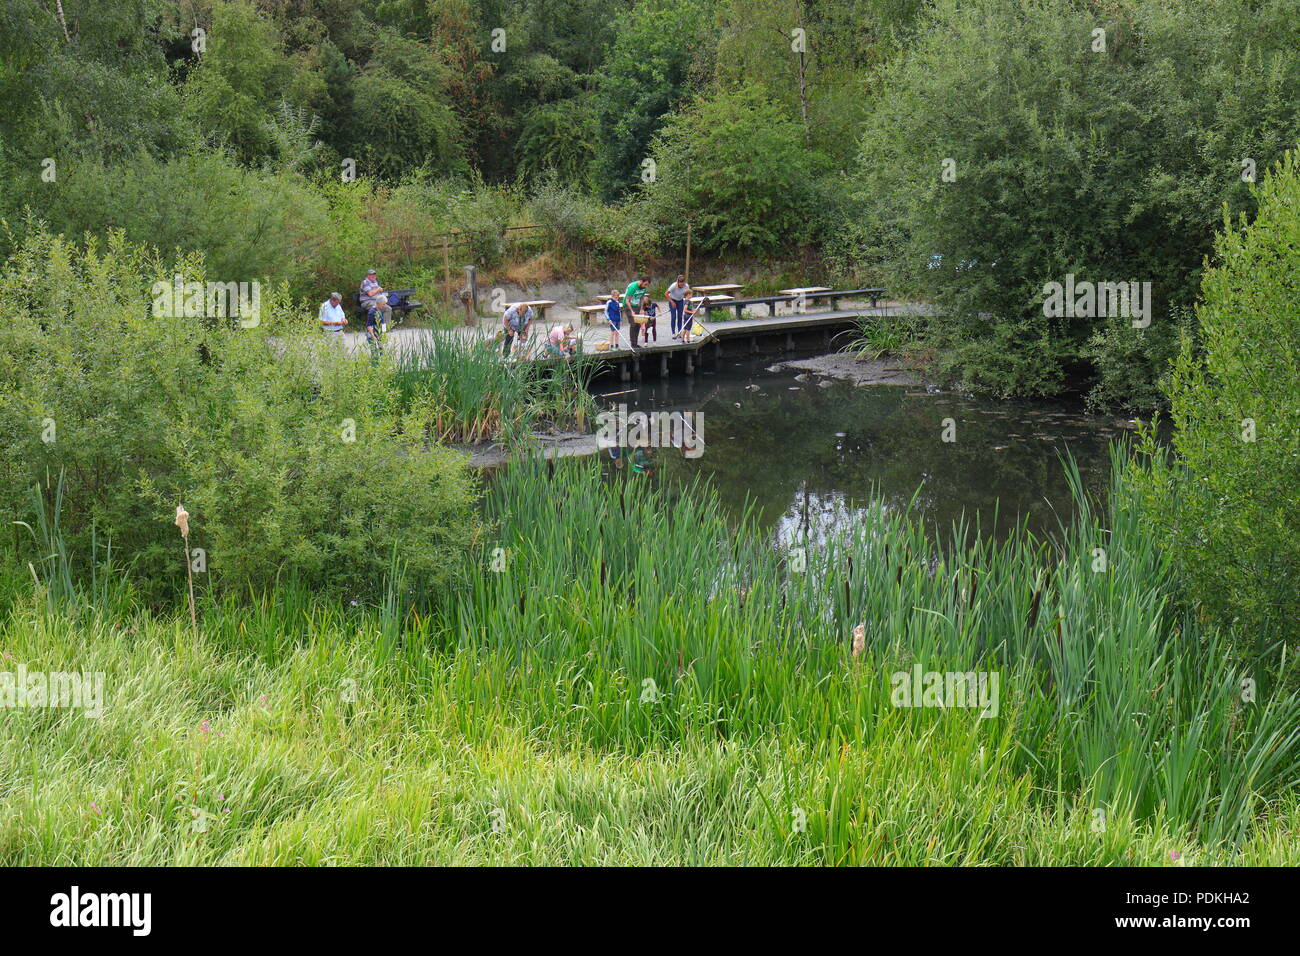 Families pond dipping on a nature trail at RSPB Fairburn Ings Nature Reserve Stock Photo